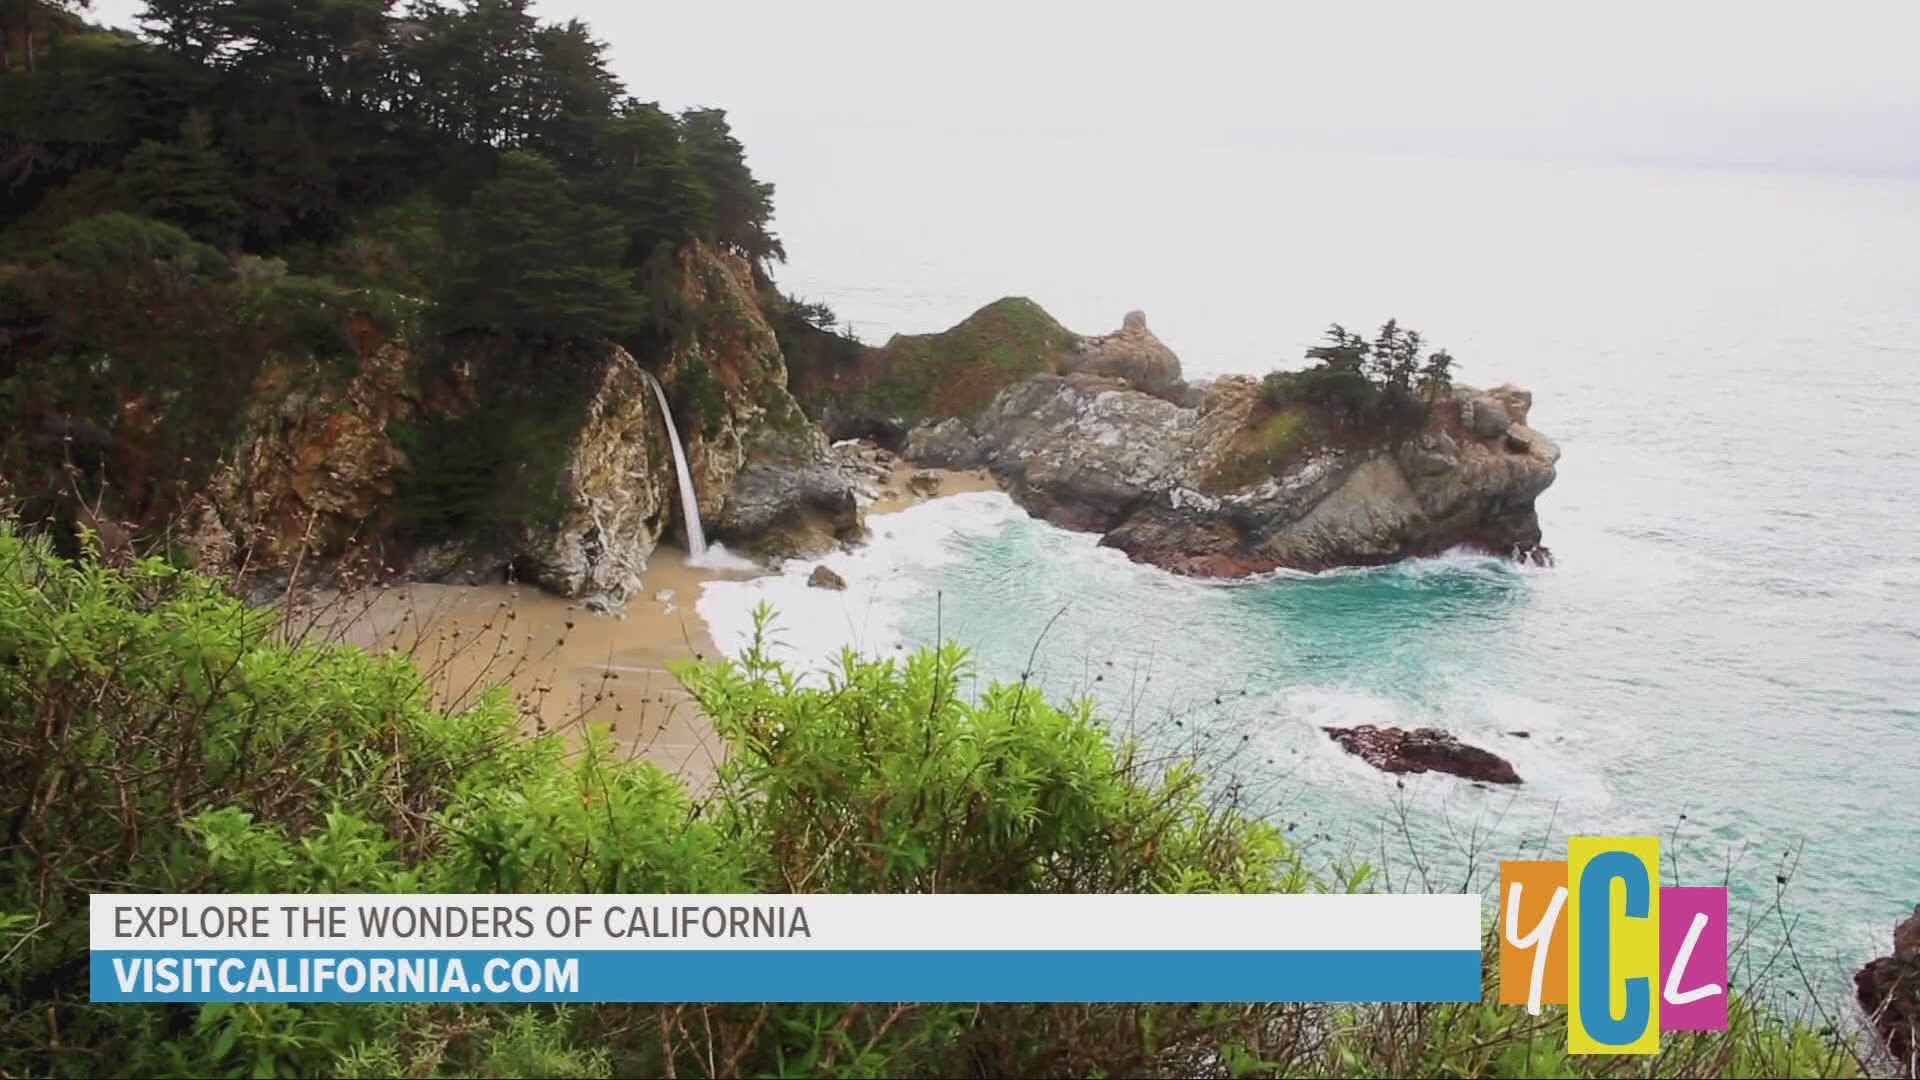 Jumpstart your travel plans right here in the Golden State. We'll remind you why vacationing in California is a must! This segment was paid for by Visit California.